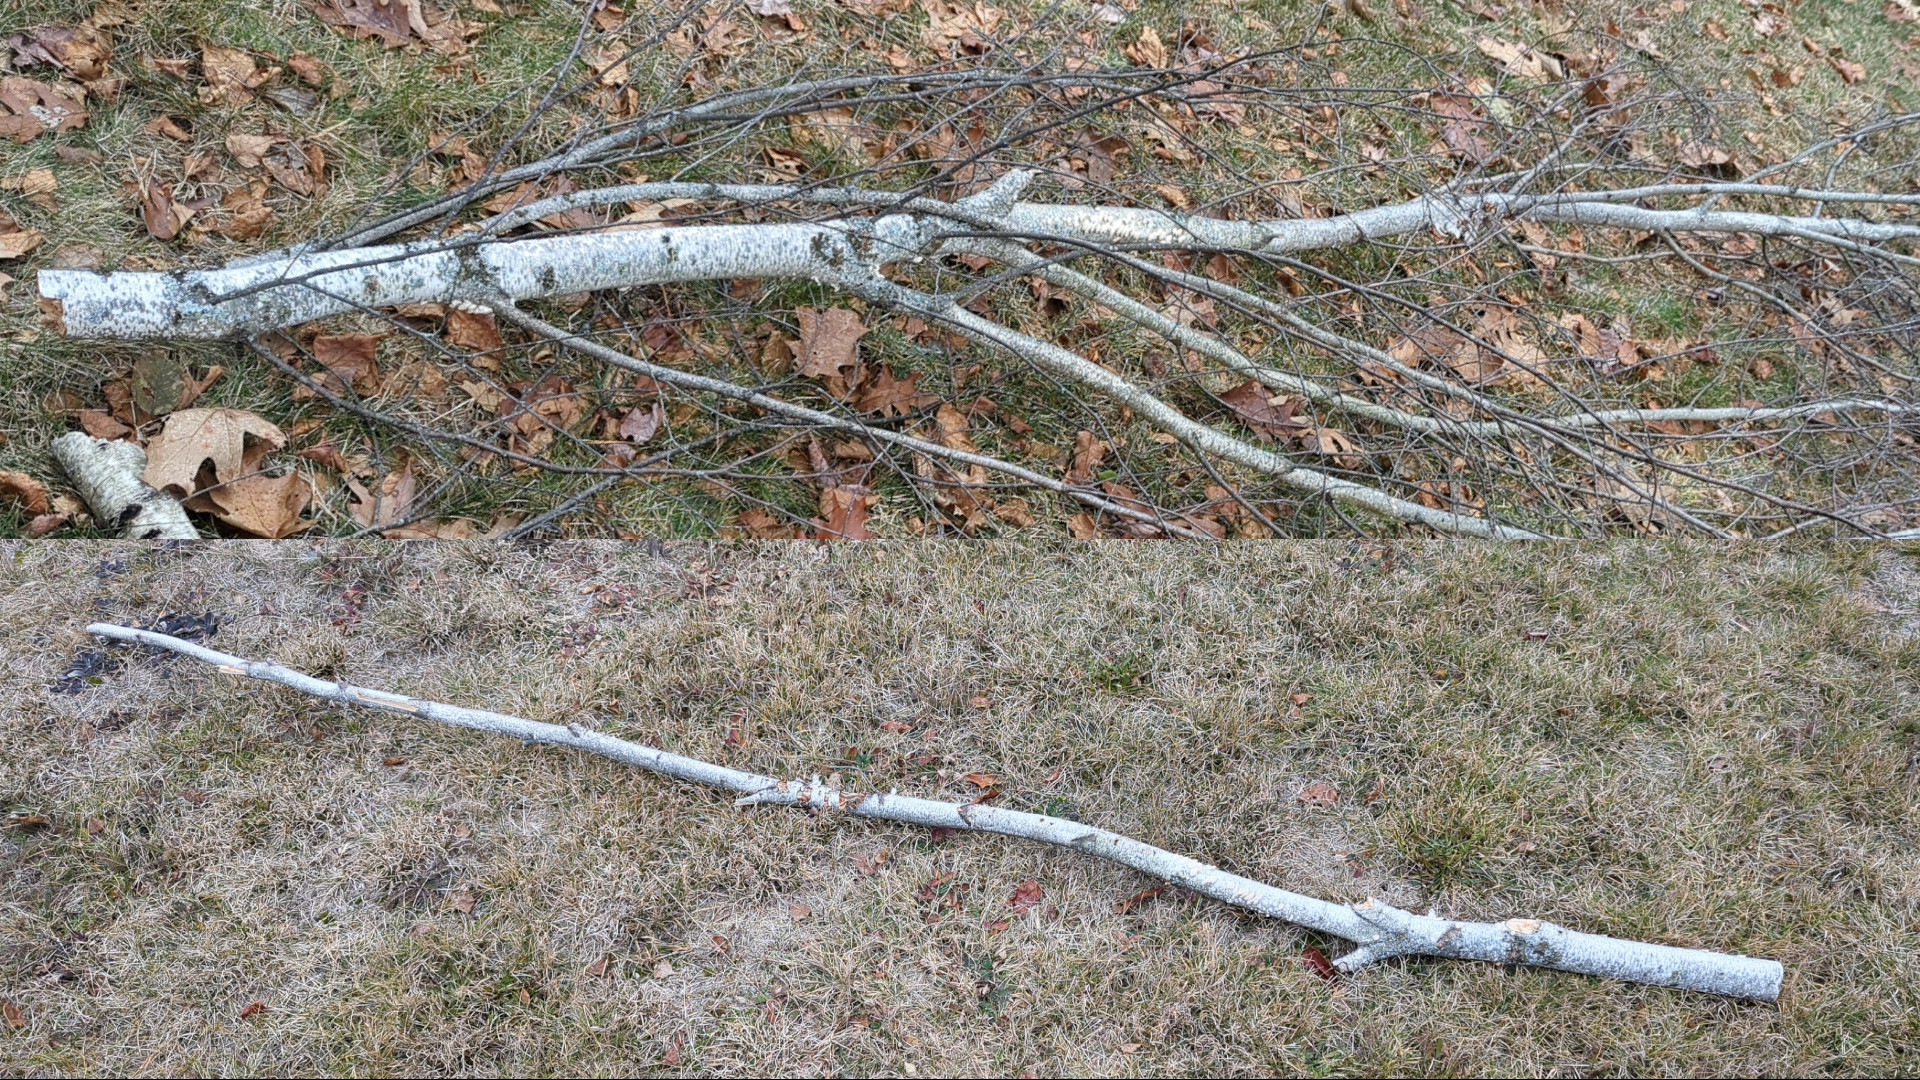 Top: a birch branch that fell out of a tree due to high winds; Bottom: the same branch with its smaller branches removed, leaving the central log